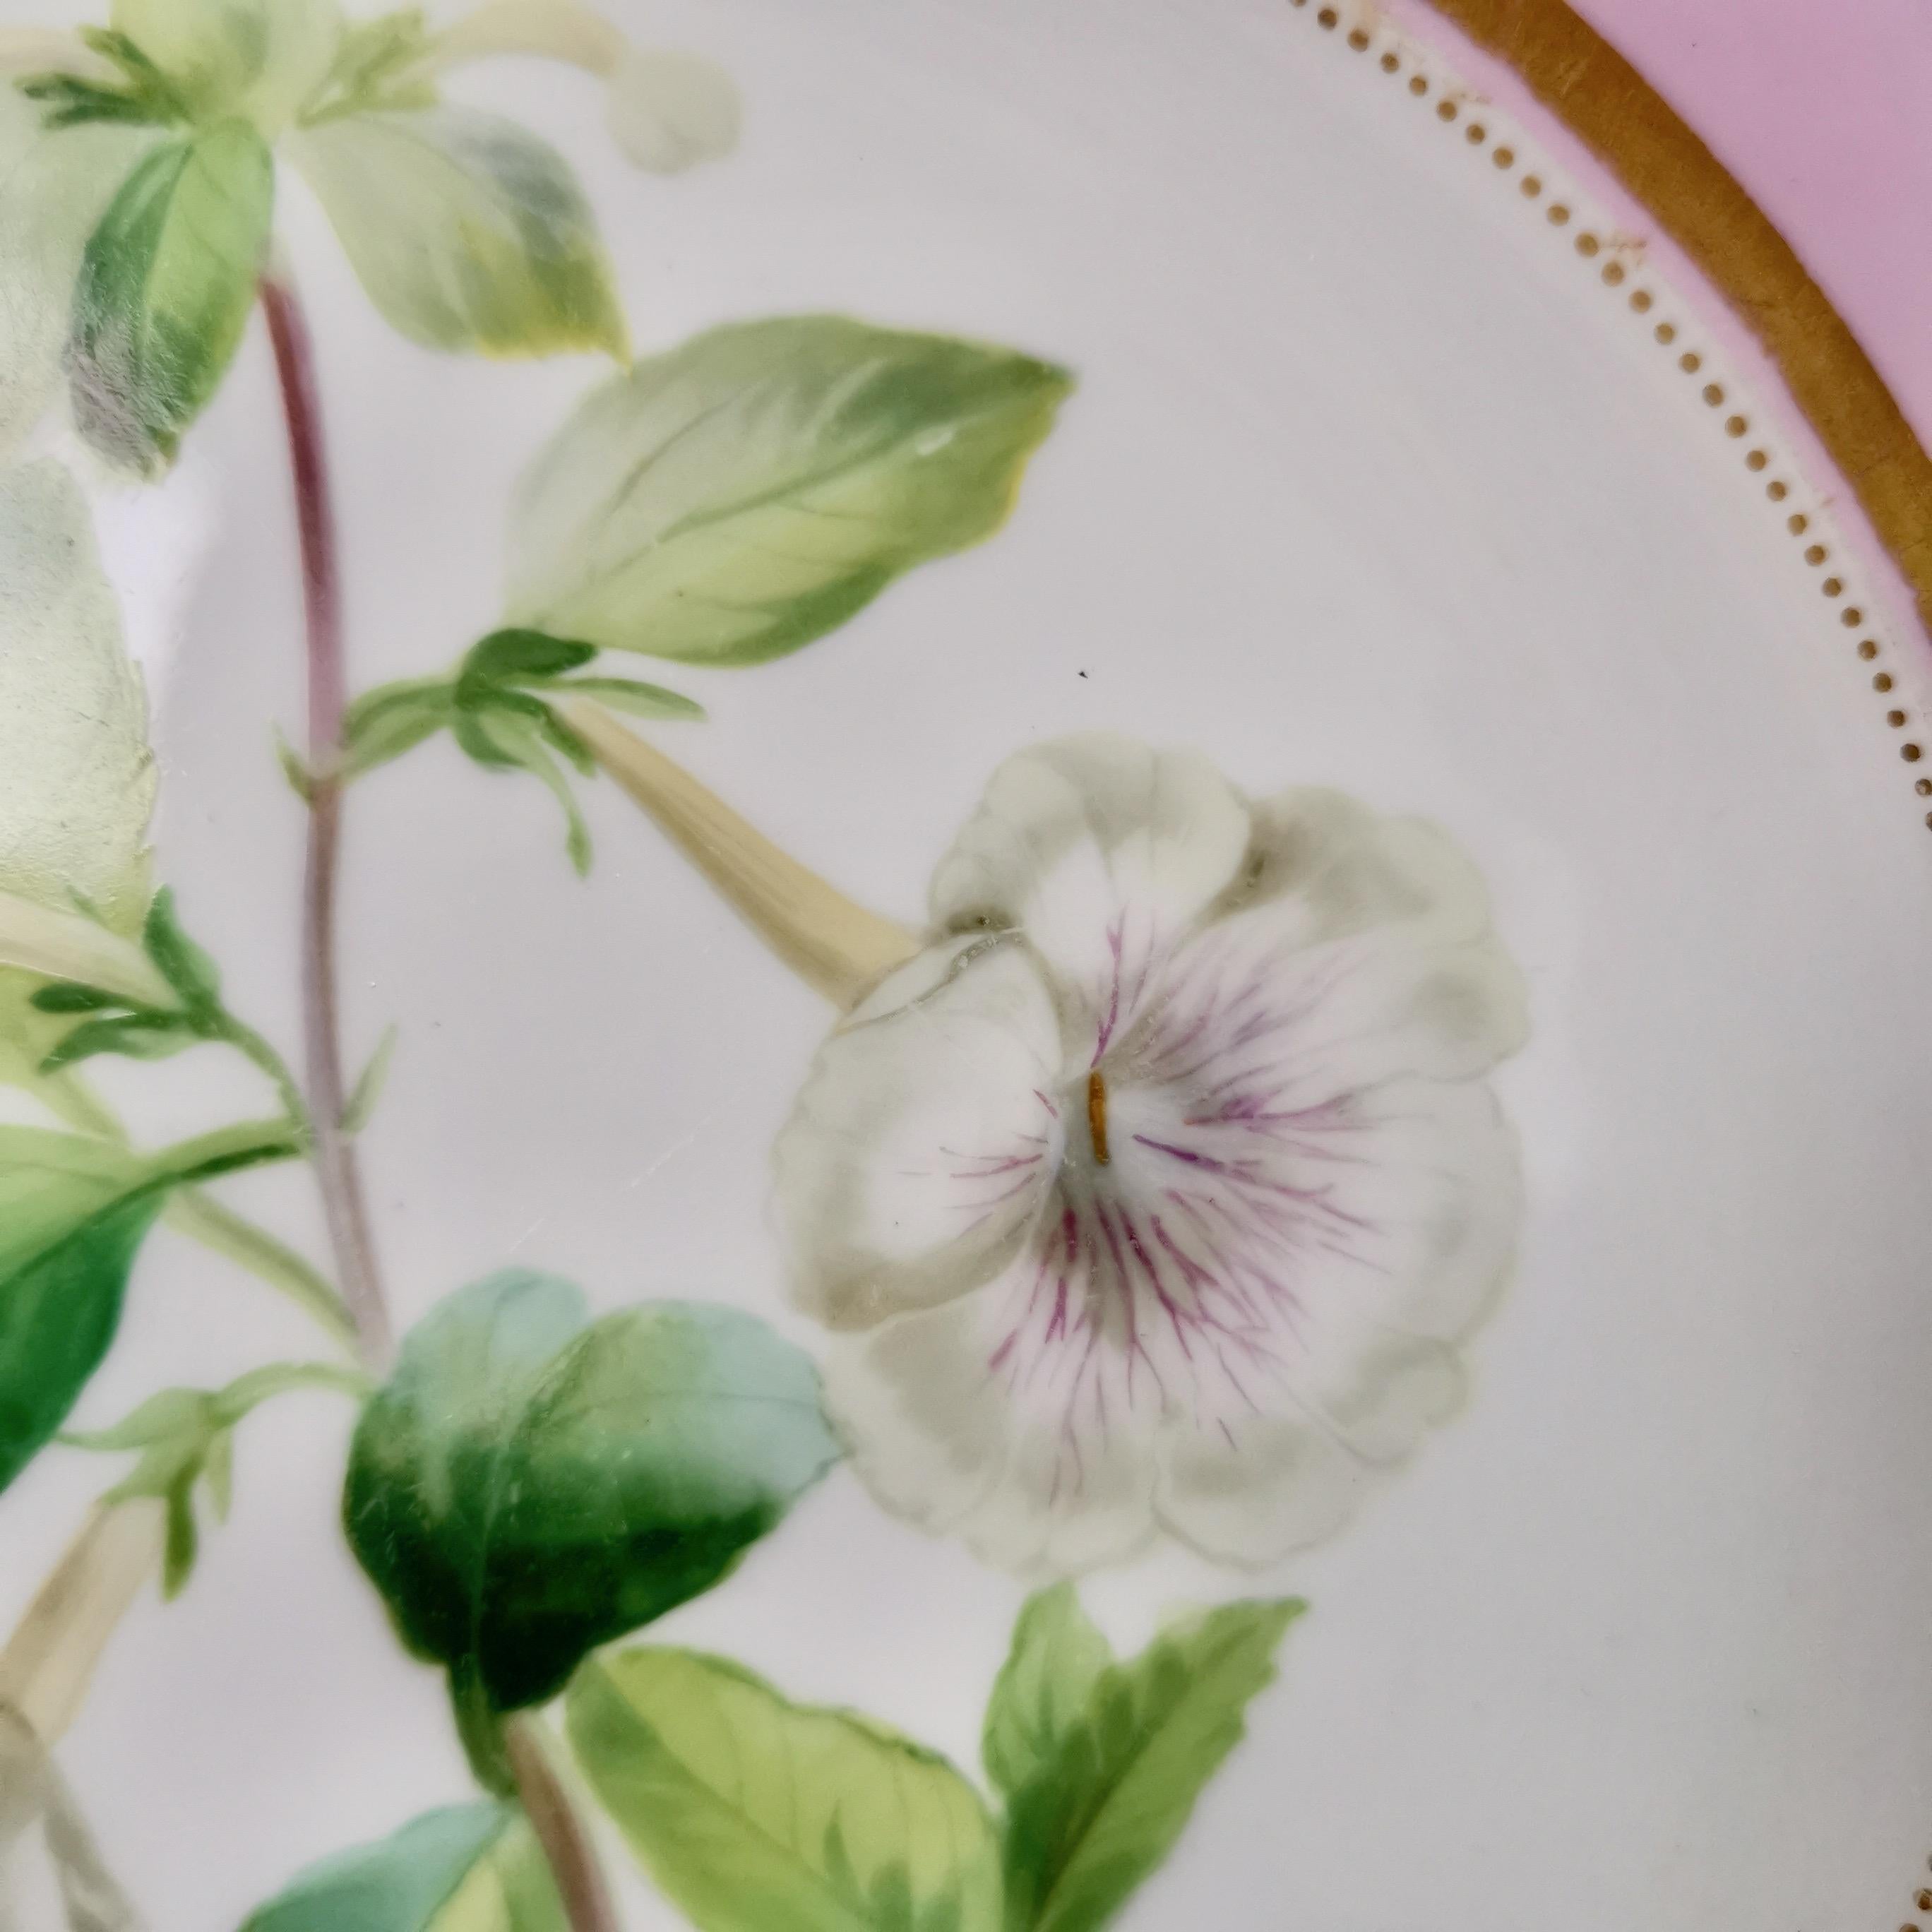 Mid-19th Century Samuel Alcock Porcelain Plate, Pink with White Achimenes, circa 1852 '1'